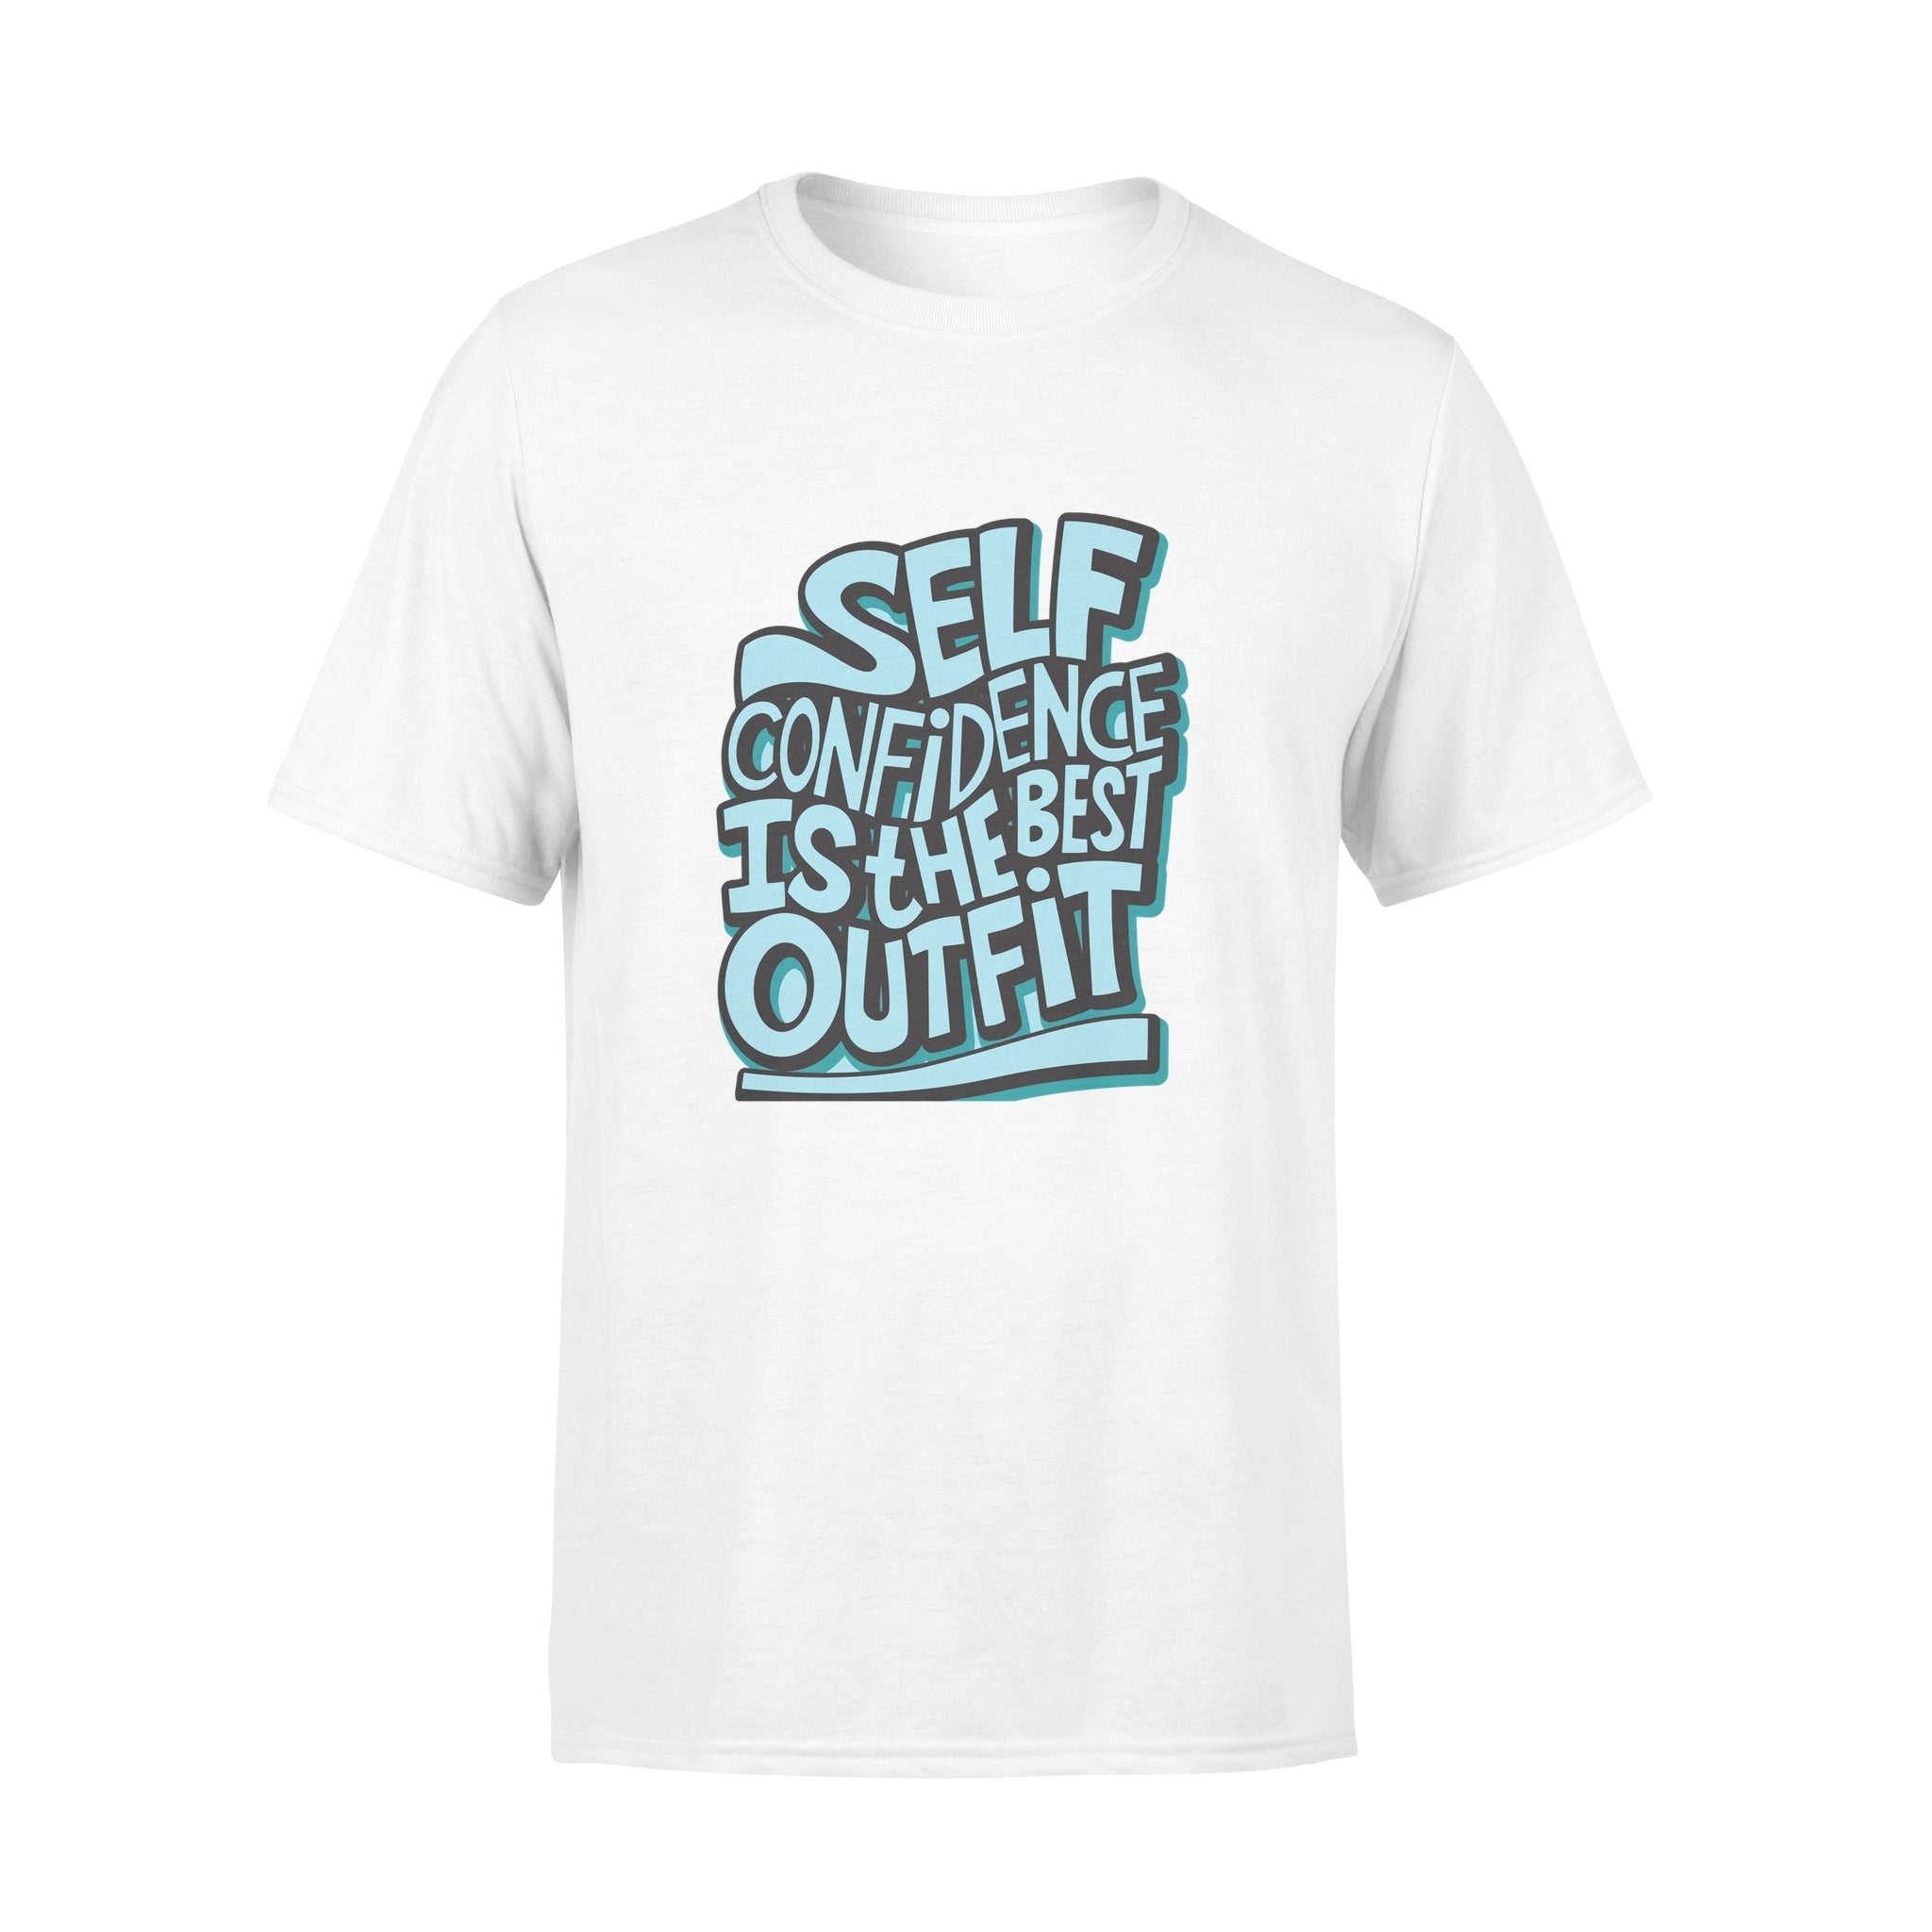 Self Confidence Is The Best Outfit -  T-shirt